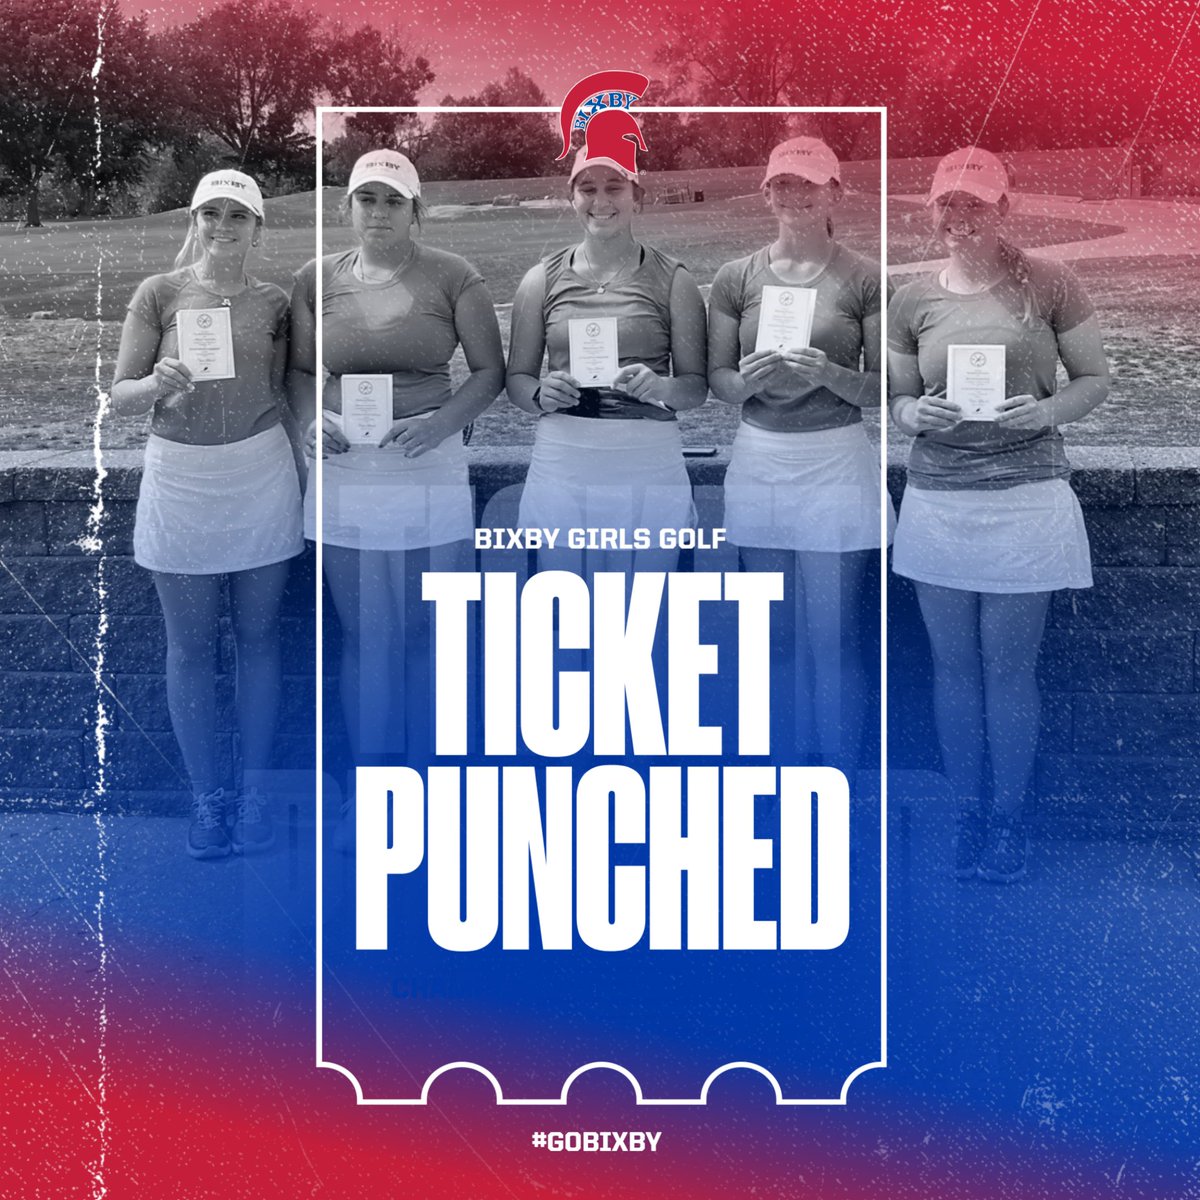 The Bixby Spartan Golf Girls team TICKET PUNCHED! to the State Tournament 🎖️ Taylor Tevis - 4th place finish today #BixbySpartans | #PlayLikeChampions